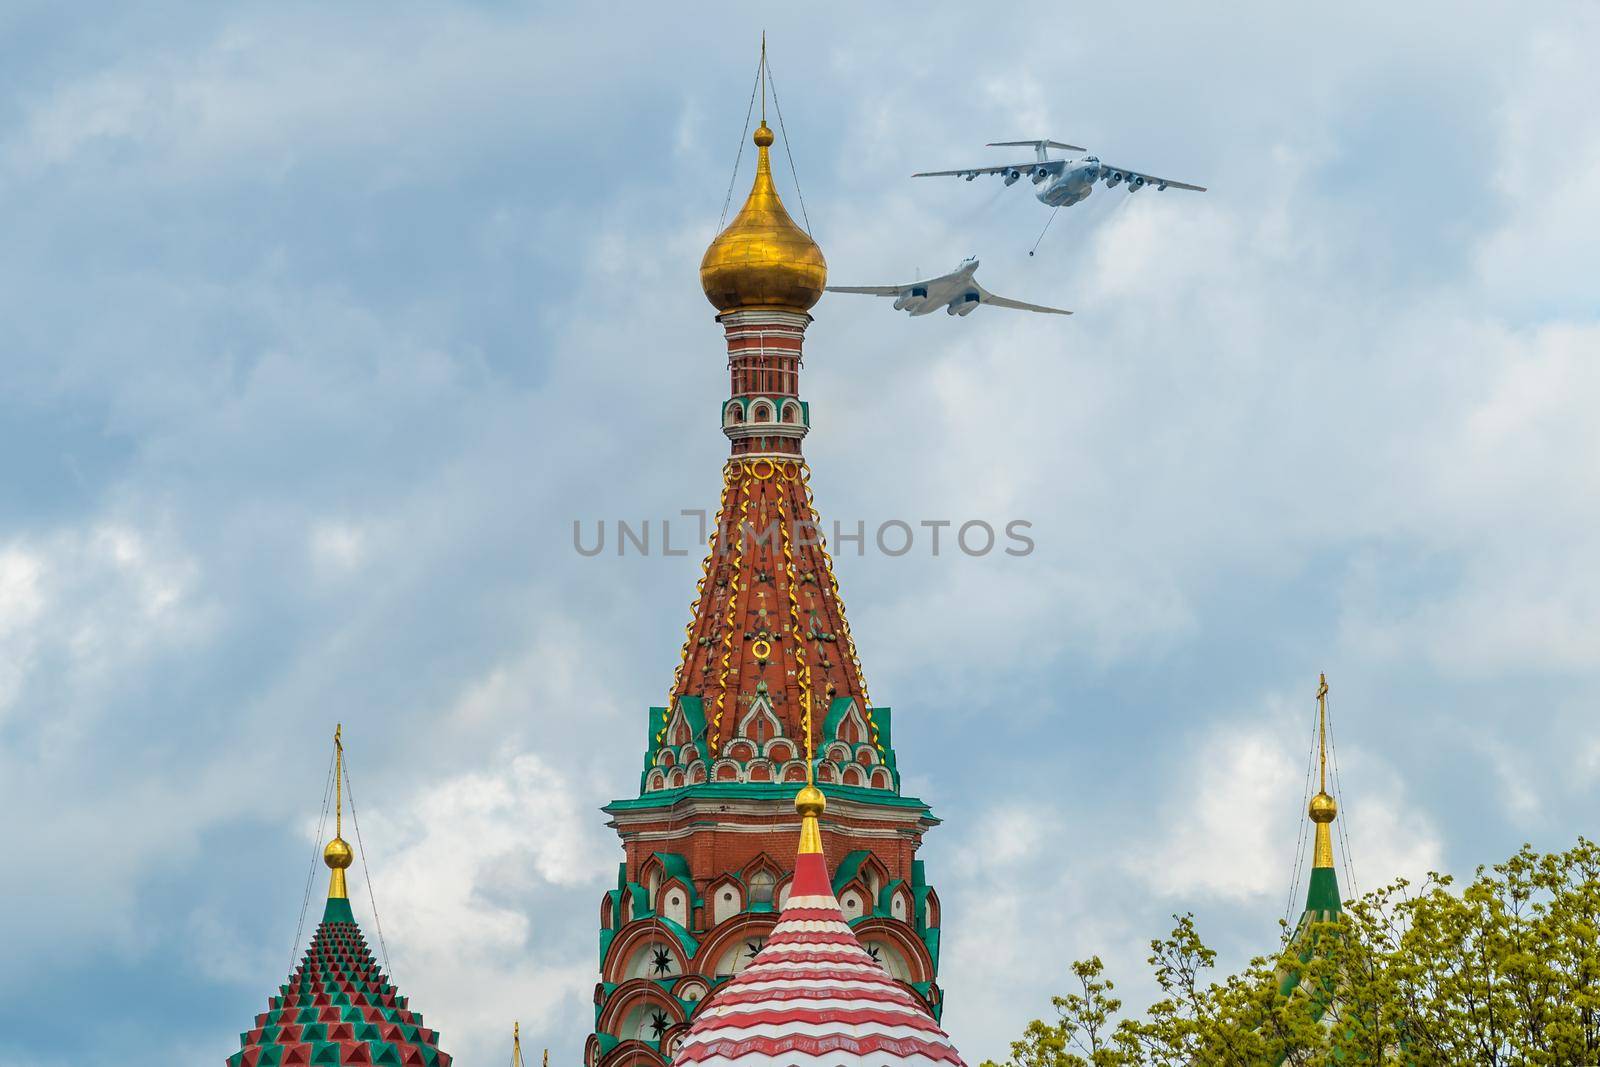 May 7, 2021, Moscow, Russia. An IL-78 tanker plane and a Tu-160 strategic bomber over Red Square in Moscow.